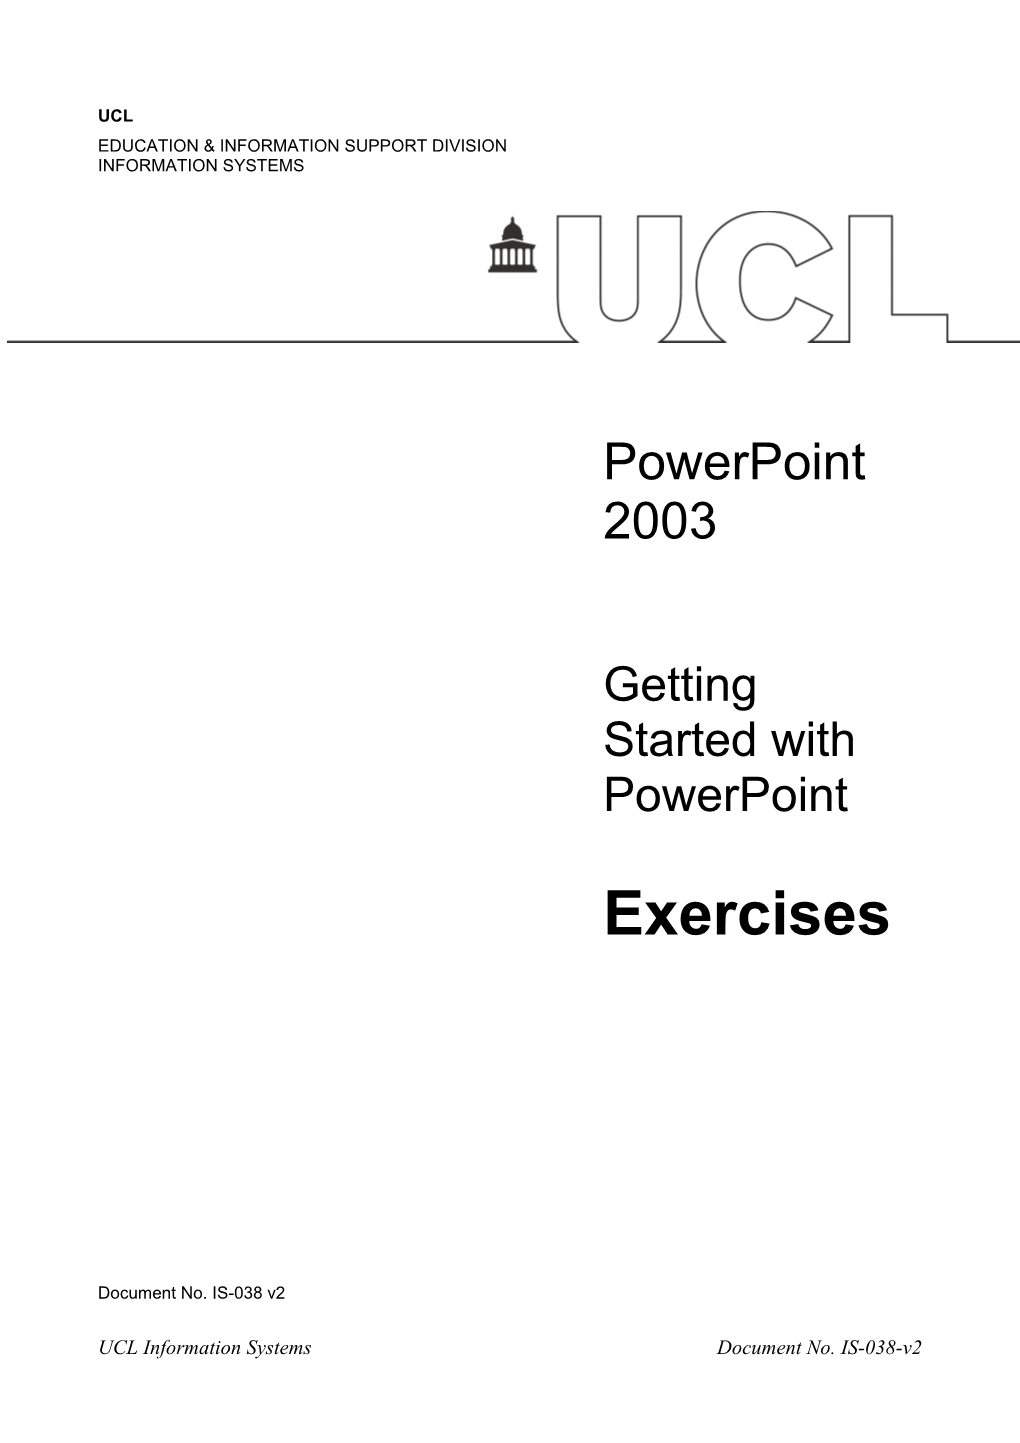 Getting Started with Powerpoint - Exercises